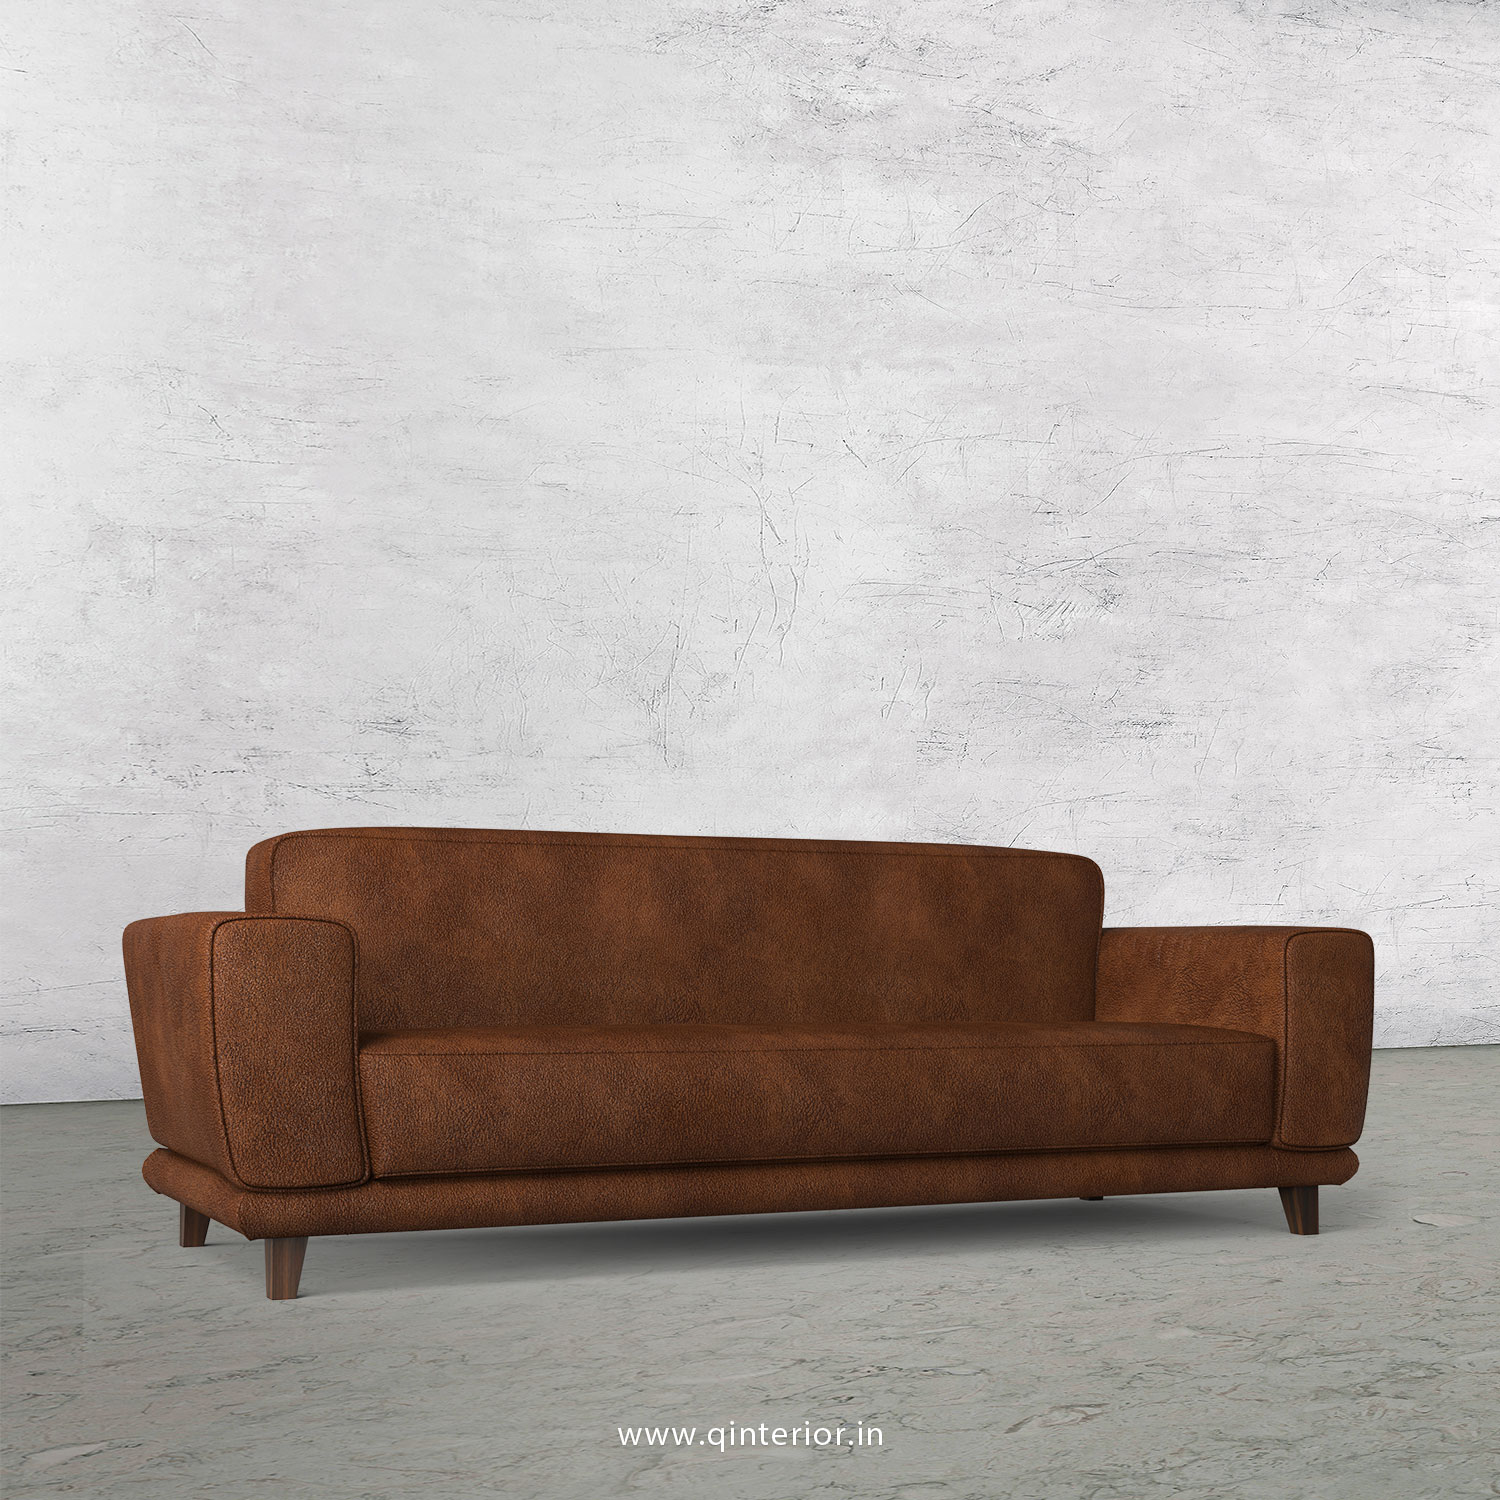 Avana 3 Seater Sofa in Fab Leather Fabric - SFA008 FL09 in Brown color ...